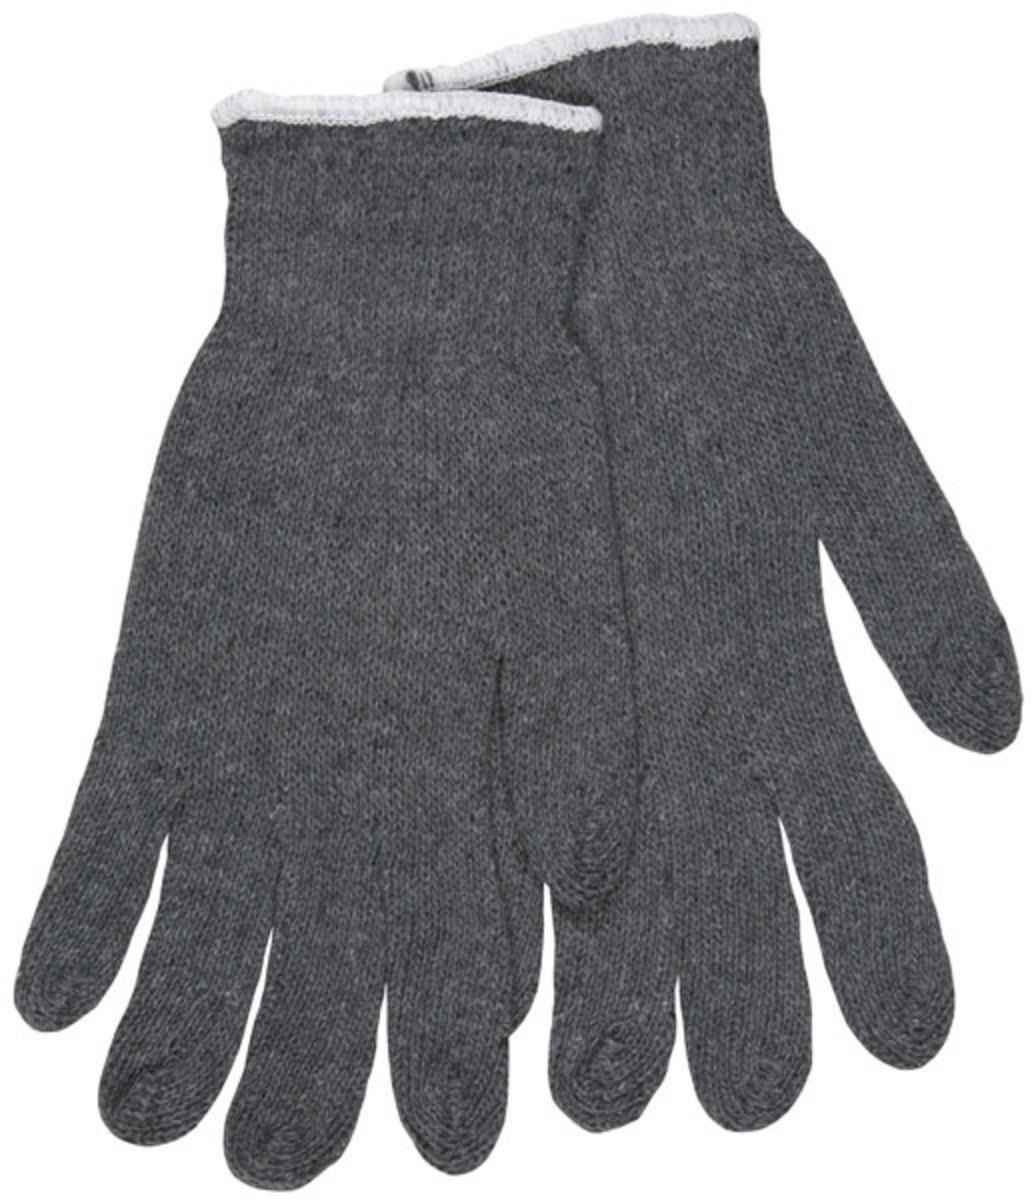 Memphis Glove Gray X-Small 7 Gauge Cotton And Polyester String Knit Work Gloves With Knit Wrist